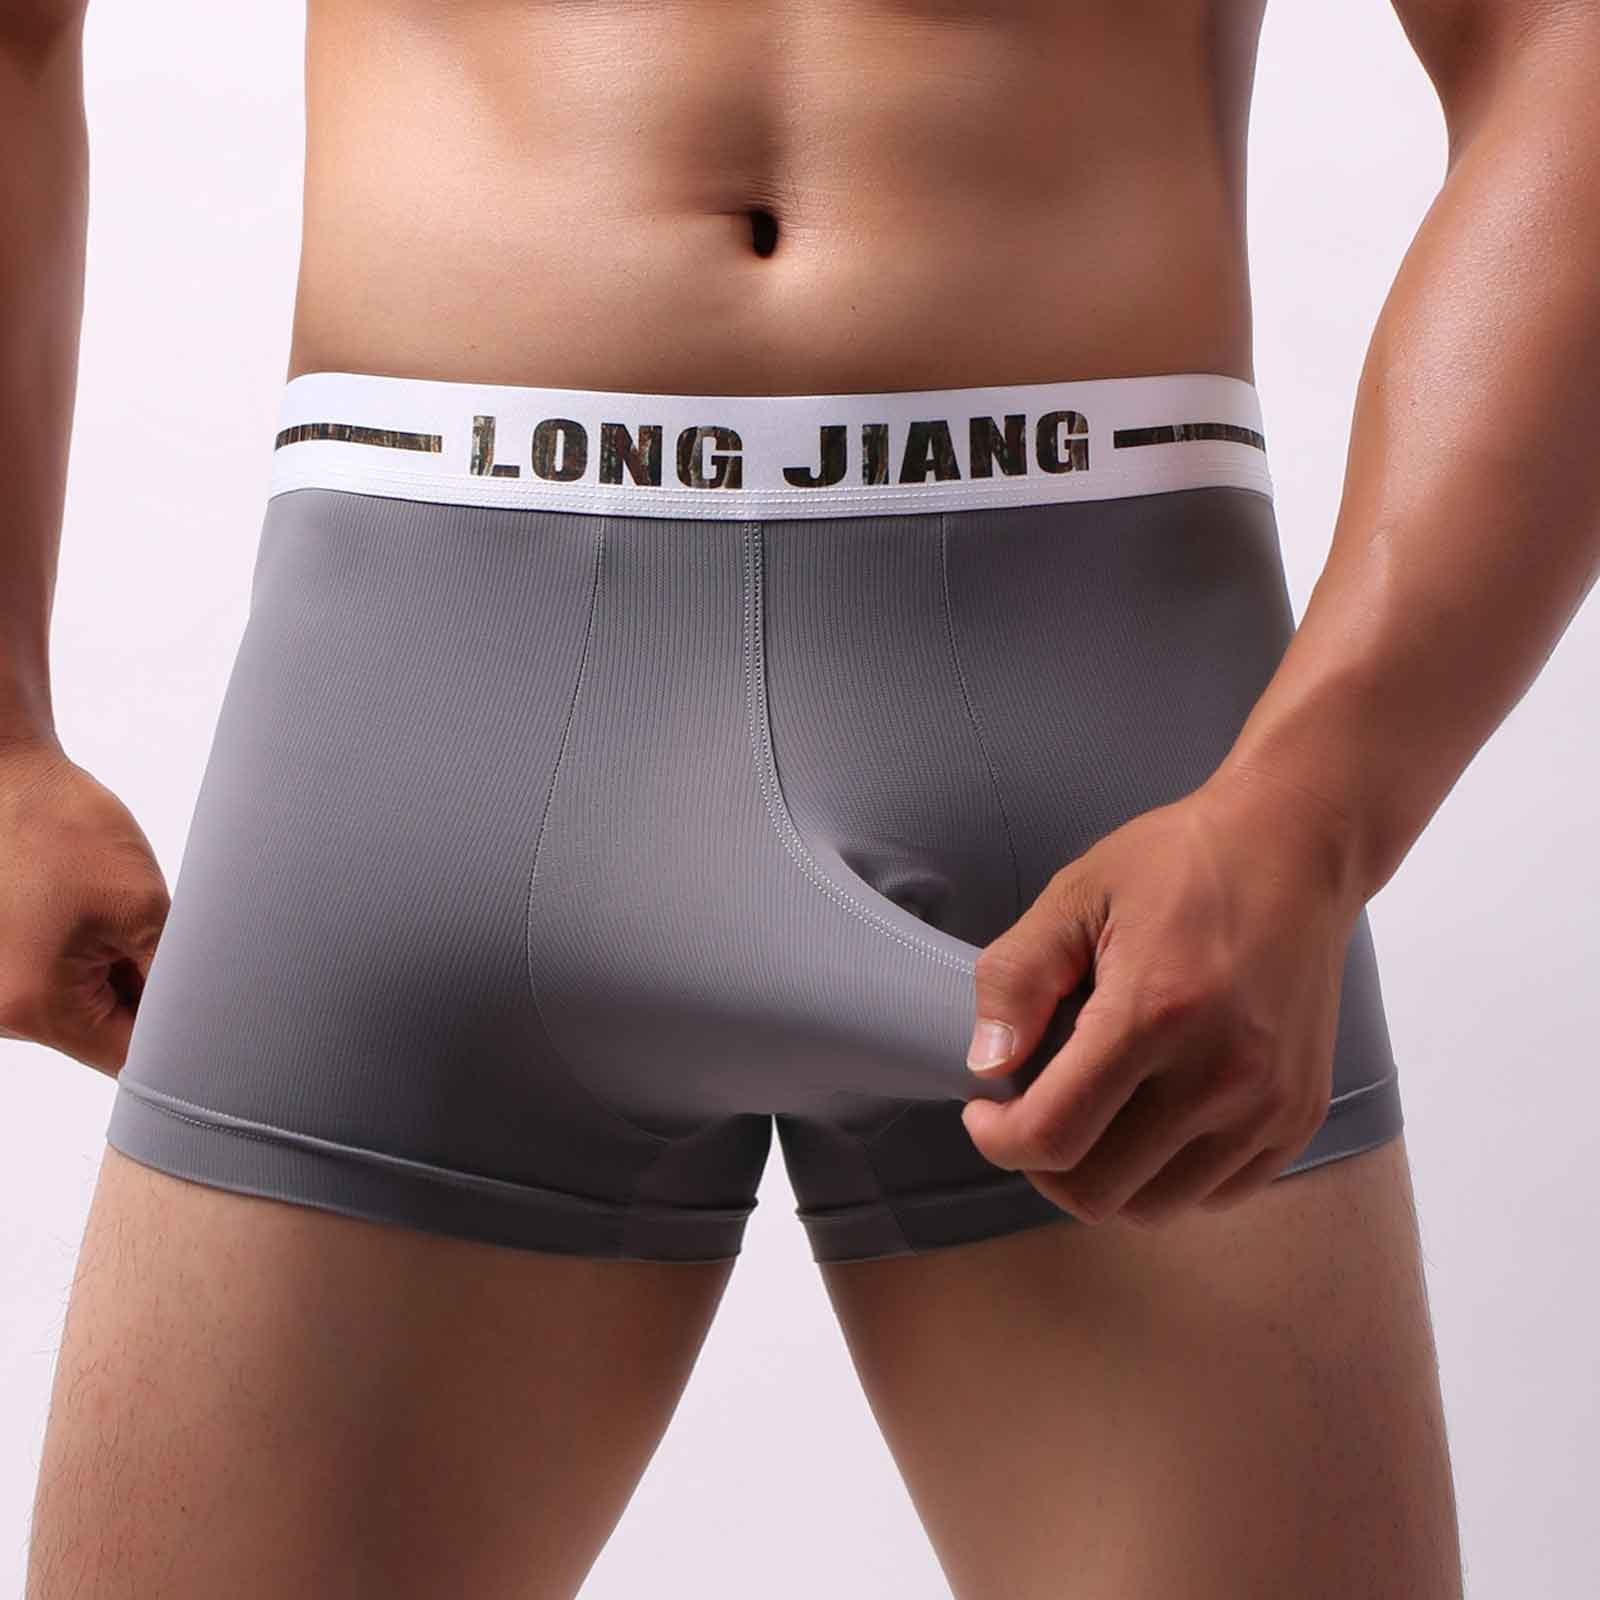 AnuirheiH Men's Lingerie Soft Briefs Underpants Knickers Shorts Sexy  Underwear 4-6$ off 2nd